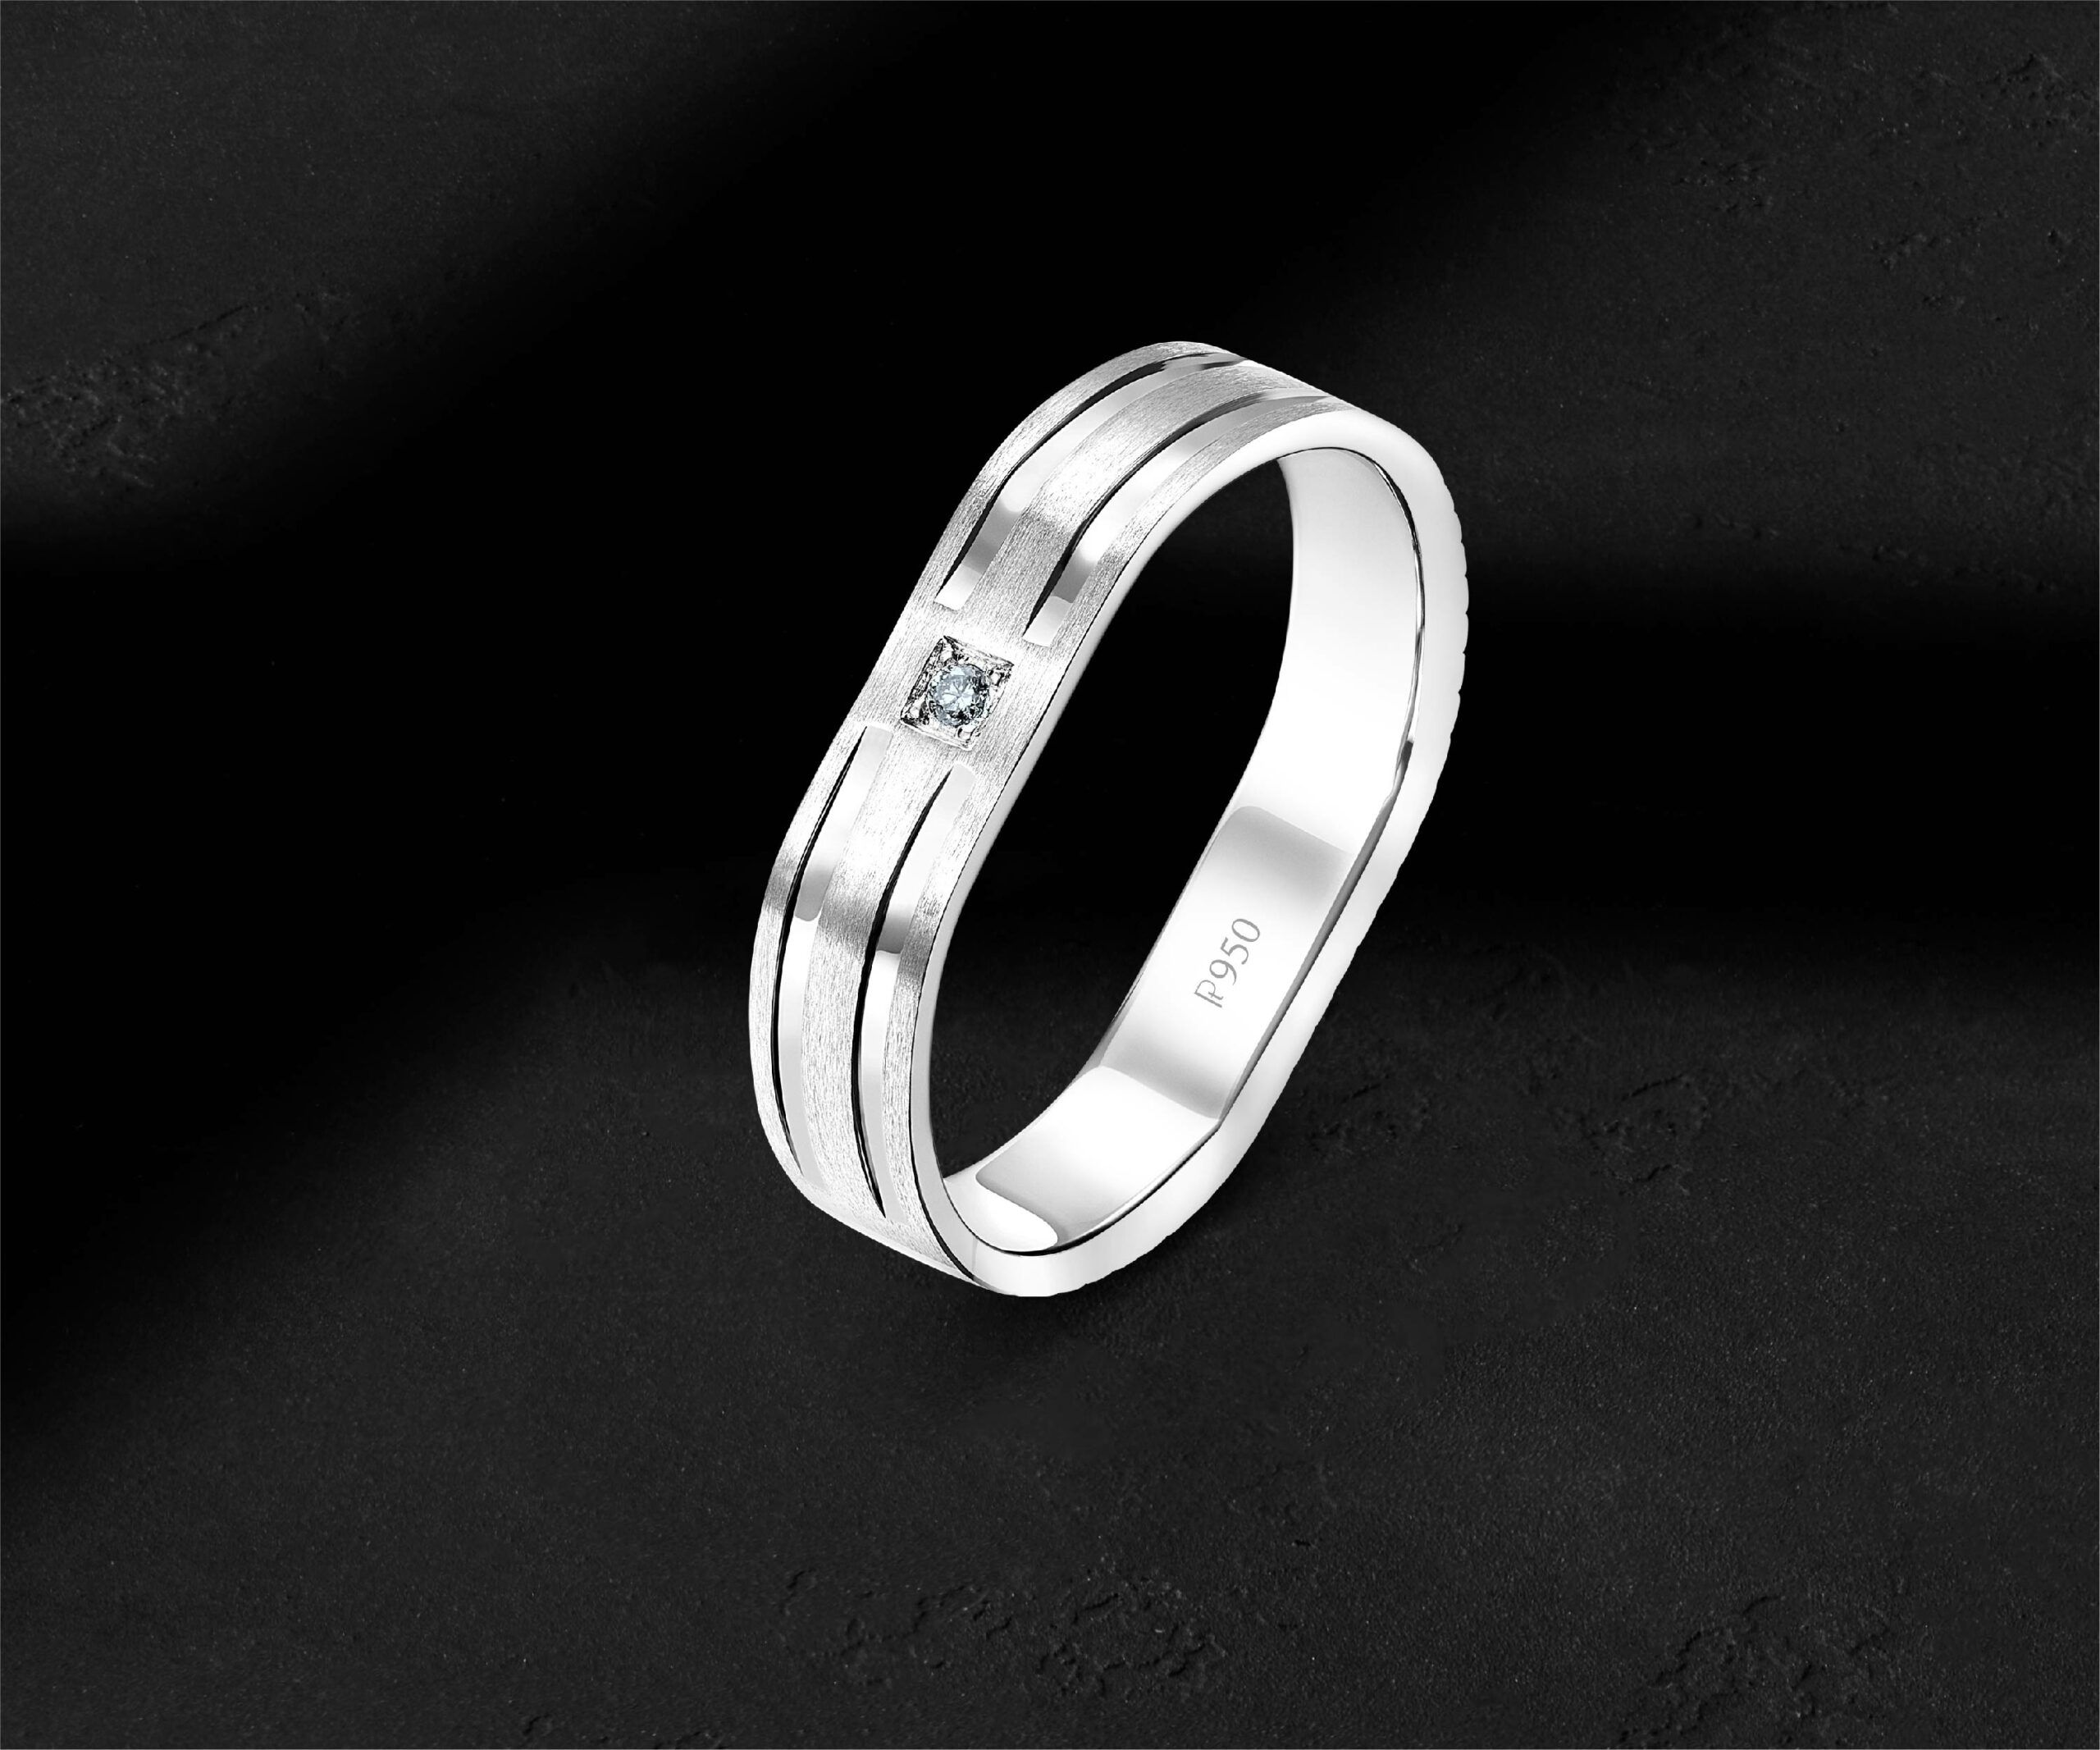 PLATINUM EVARA introduces its light weight jewellery collection | Rose gold mens  ring, Rings mens wedding bands, Mens gold rings